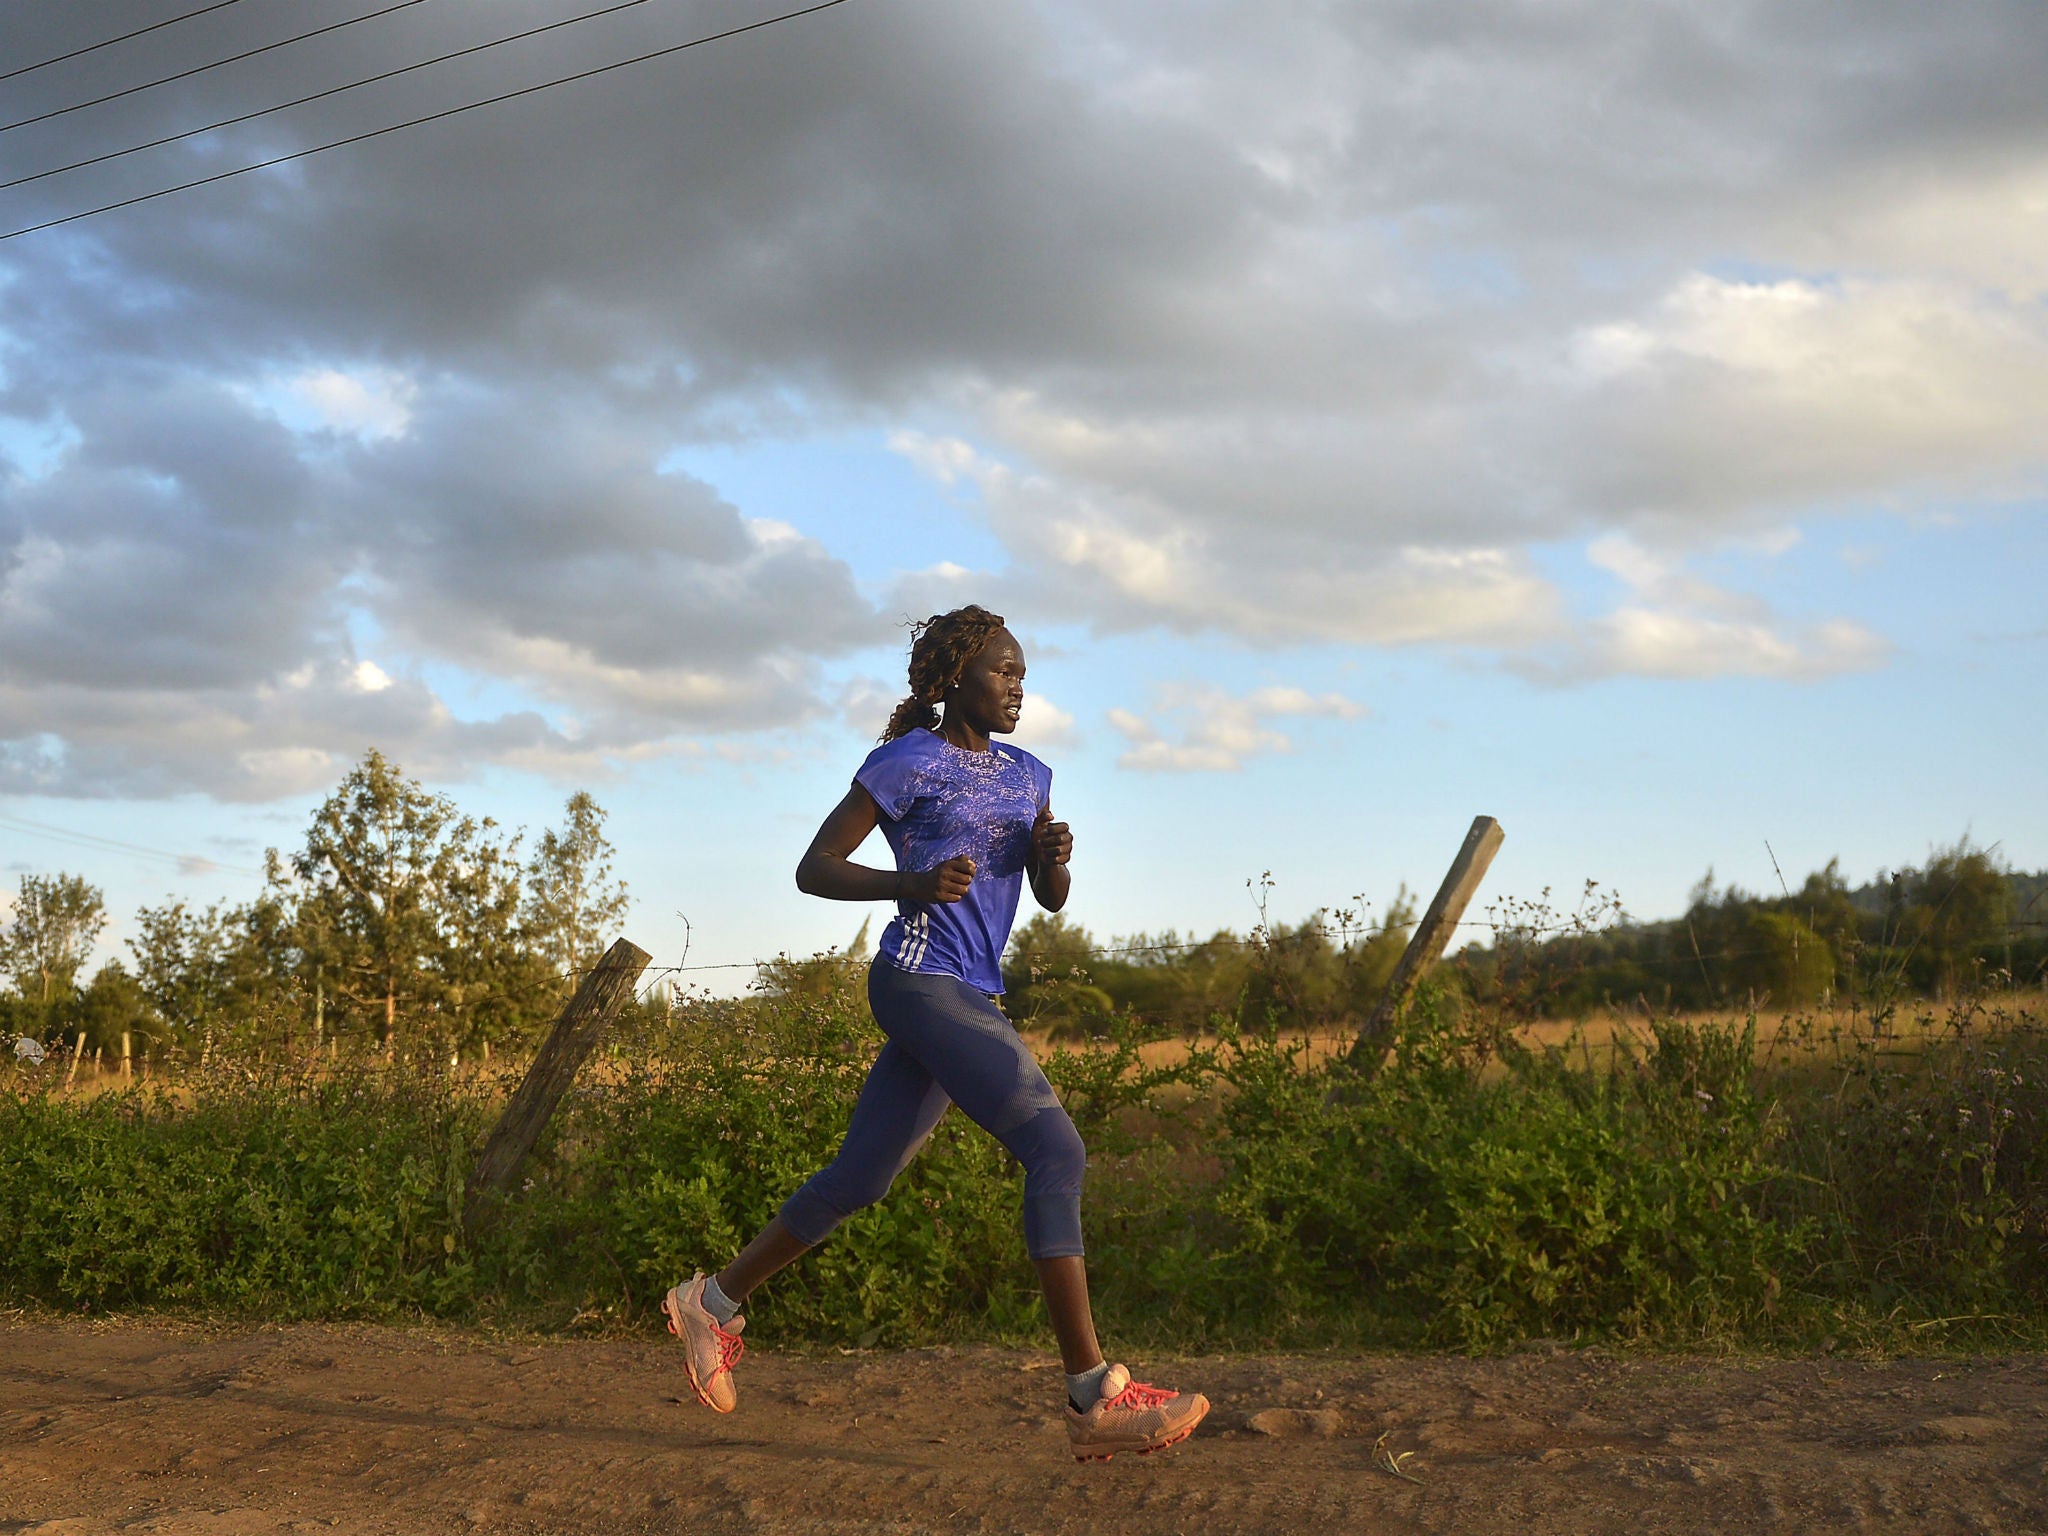 Rose Nathike Lokonyen is one of five runners on the refugee Olympic team